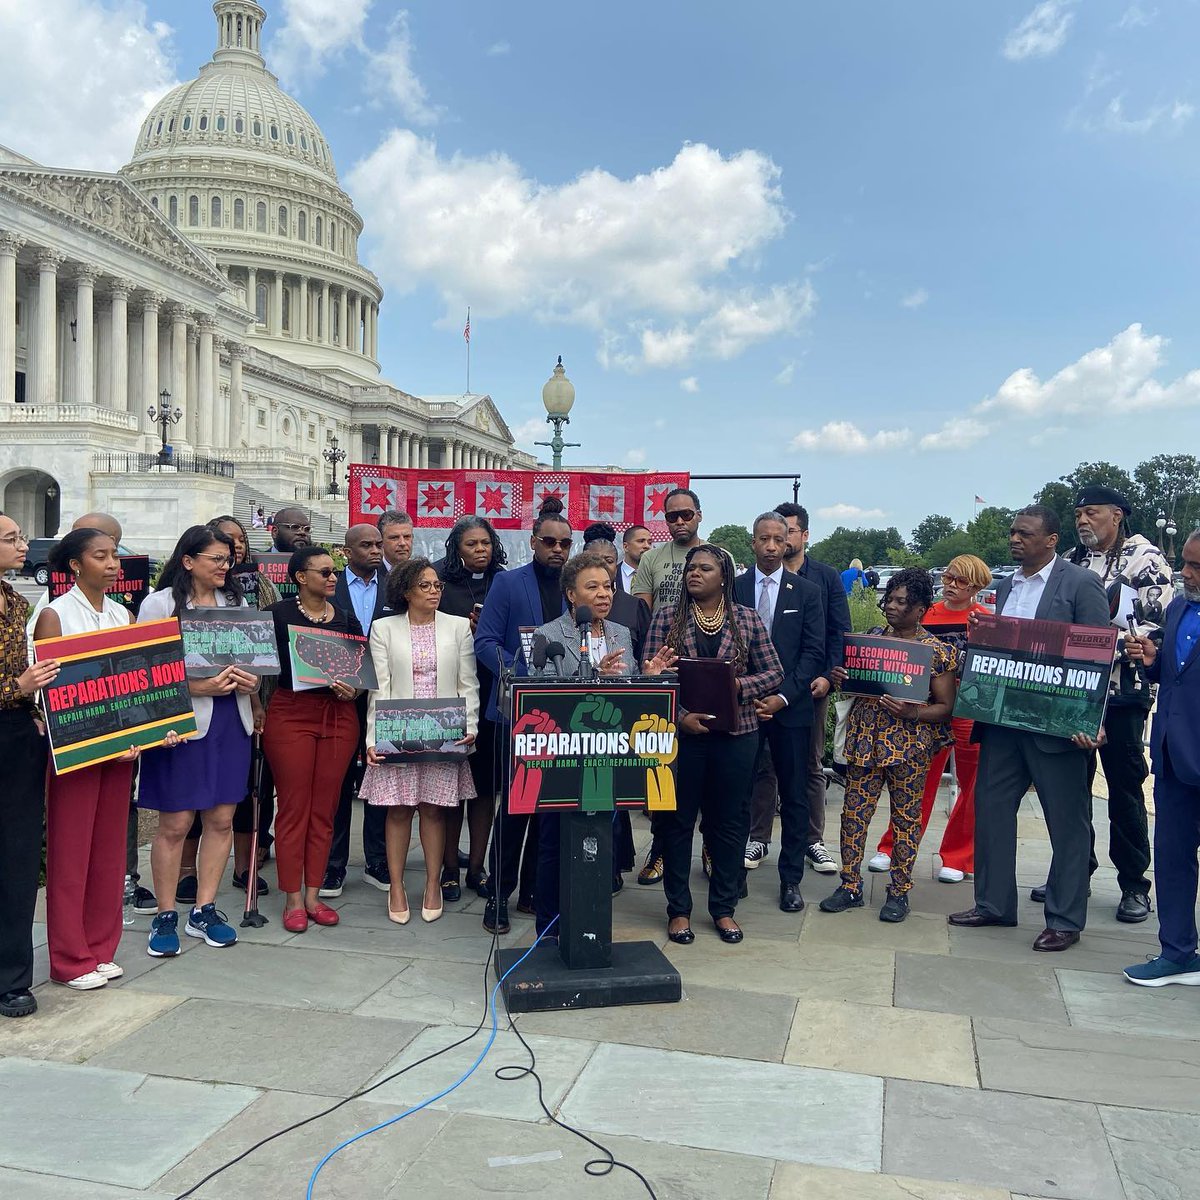 Reparations is not just about repairing the damage.

Reparations means equity.
Reparations means justice.
Reparations means dismantling the systems that have kept us marginalized.

Proud to support @RepCori’s #ReparationsResolution today. ✊🏾